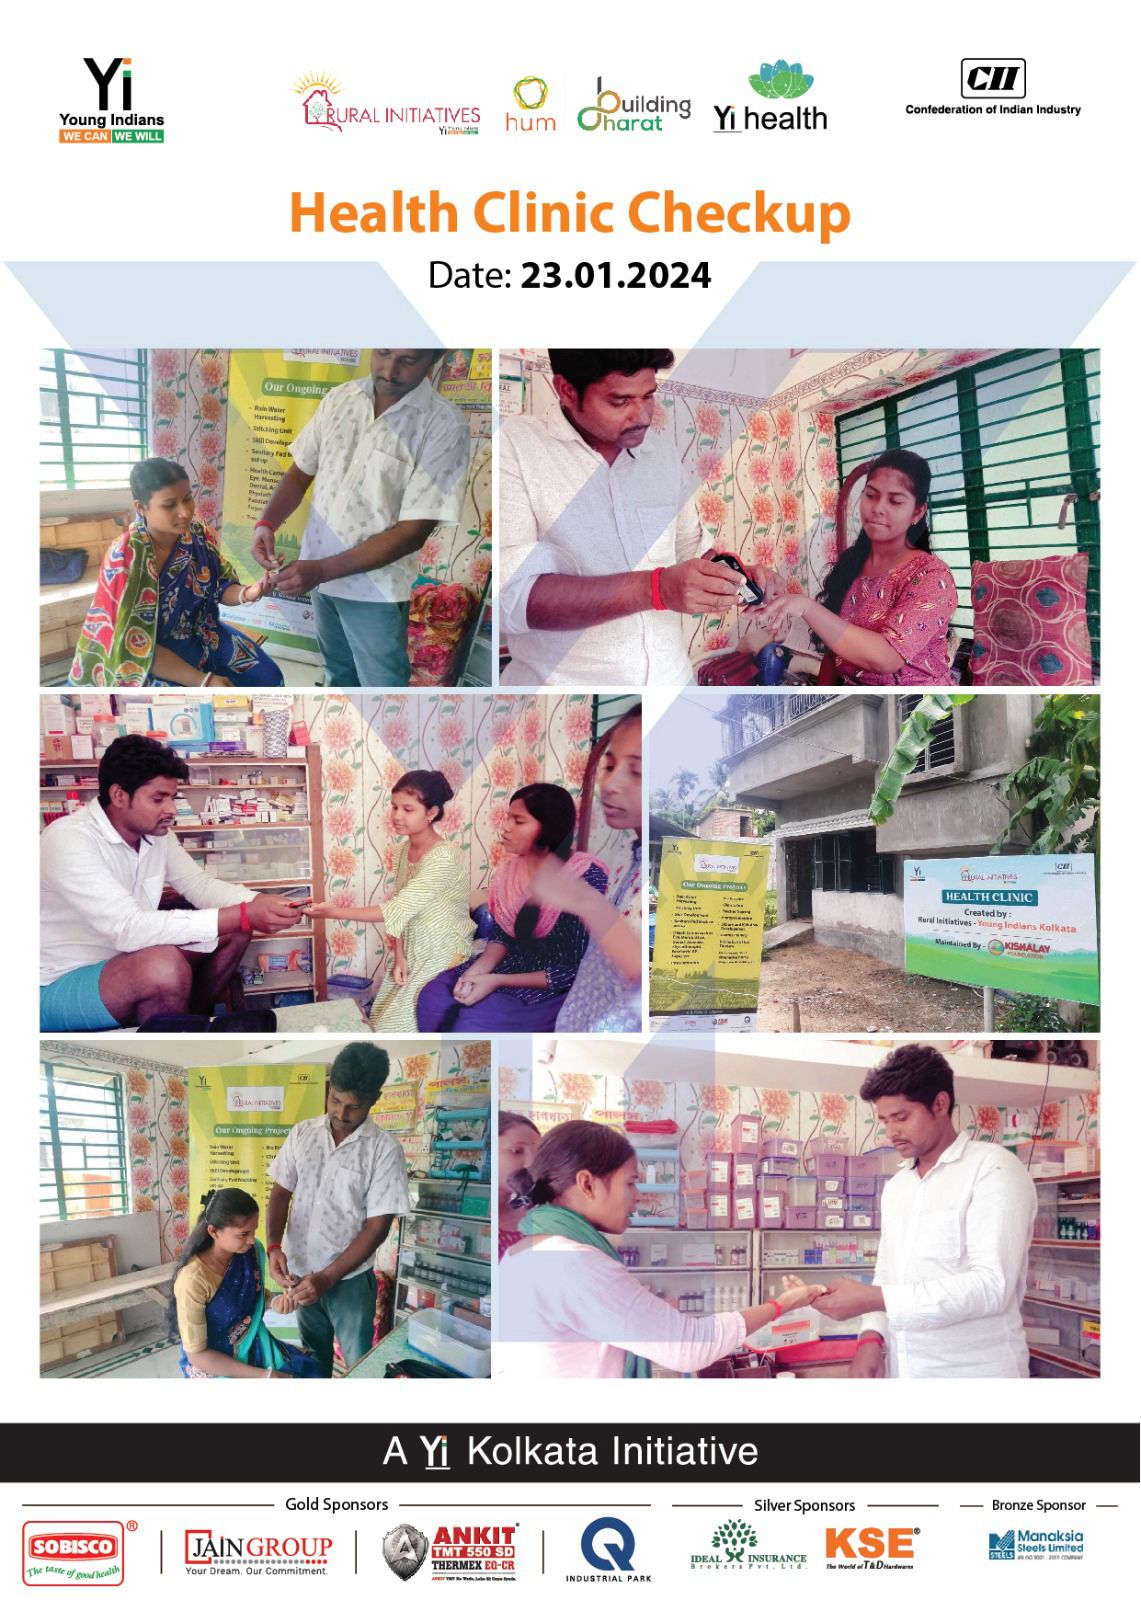 Yi24 | Health Clinic, a proud establishment by Rural Initiative and Health Vertical